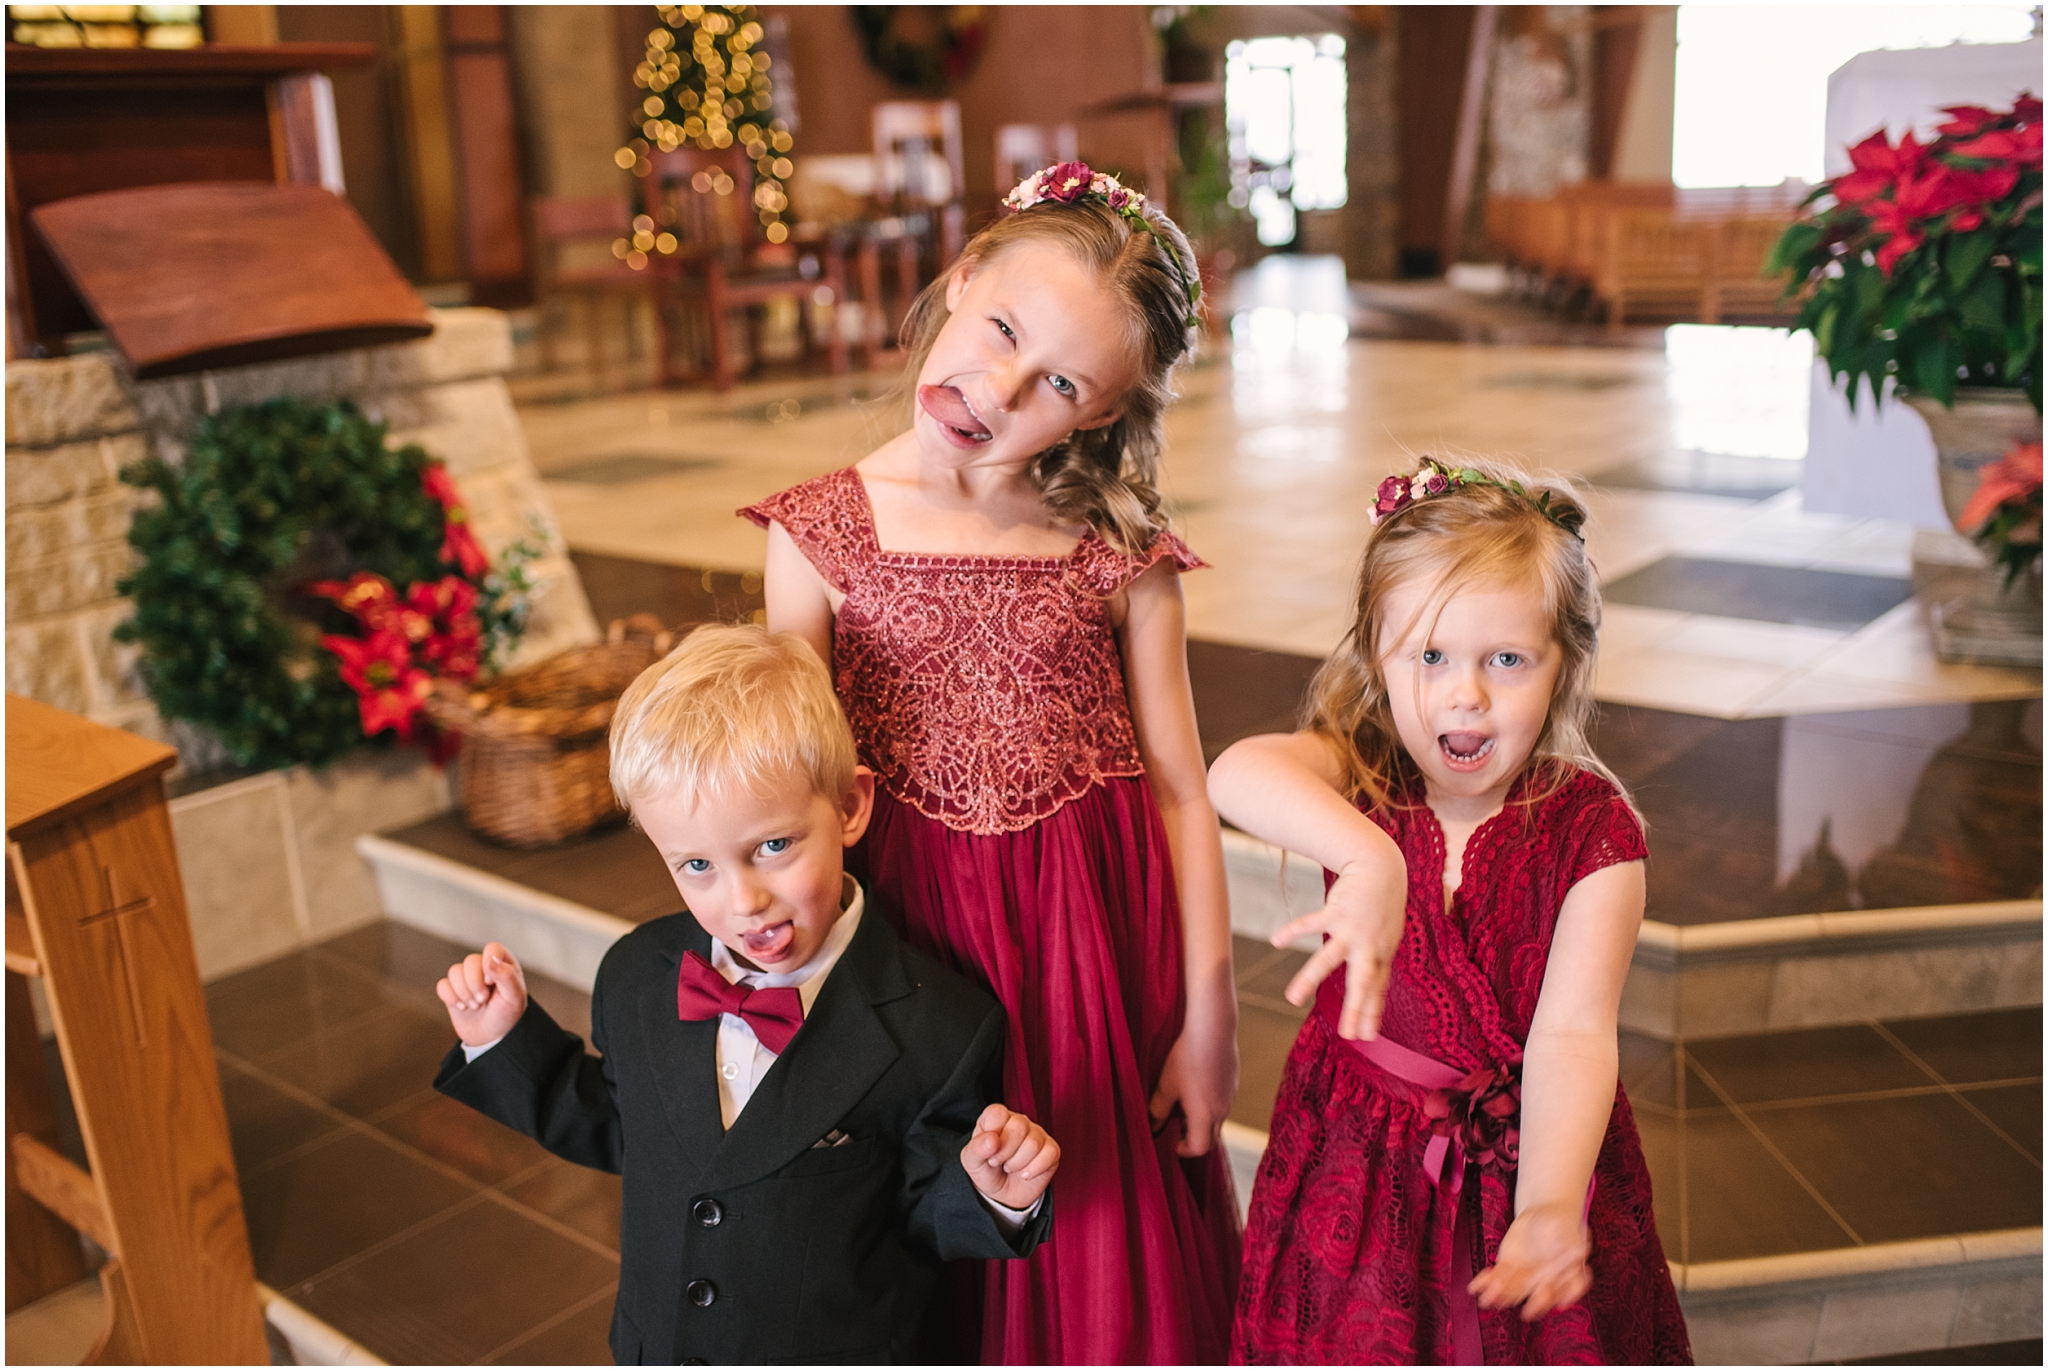 Flower girls and ring bearer at winter wedding at St Francis of Assisi Catholic Church